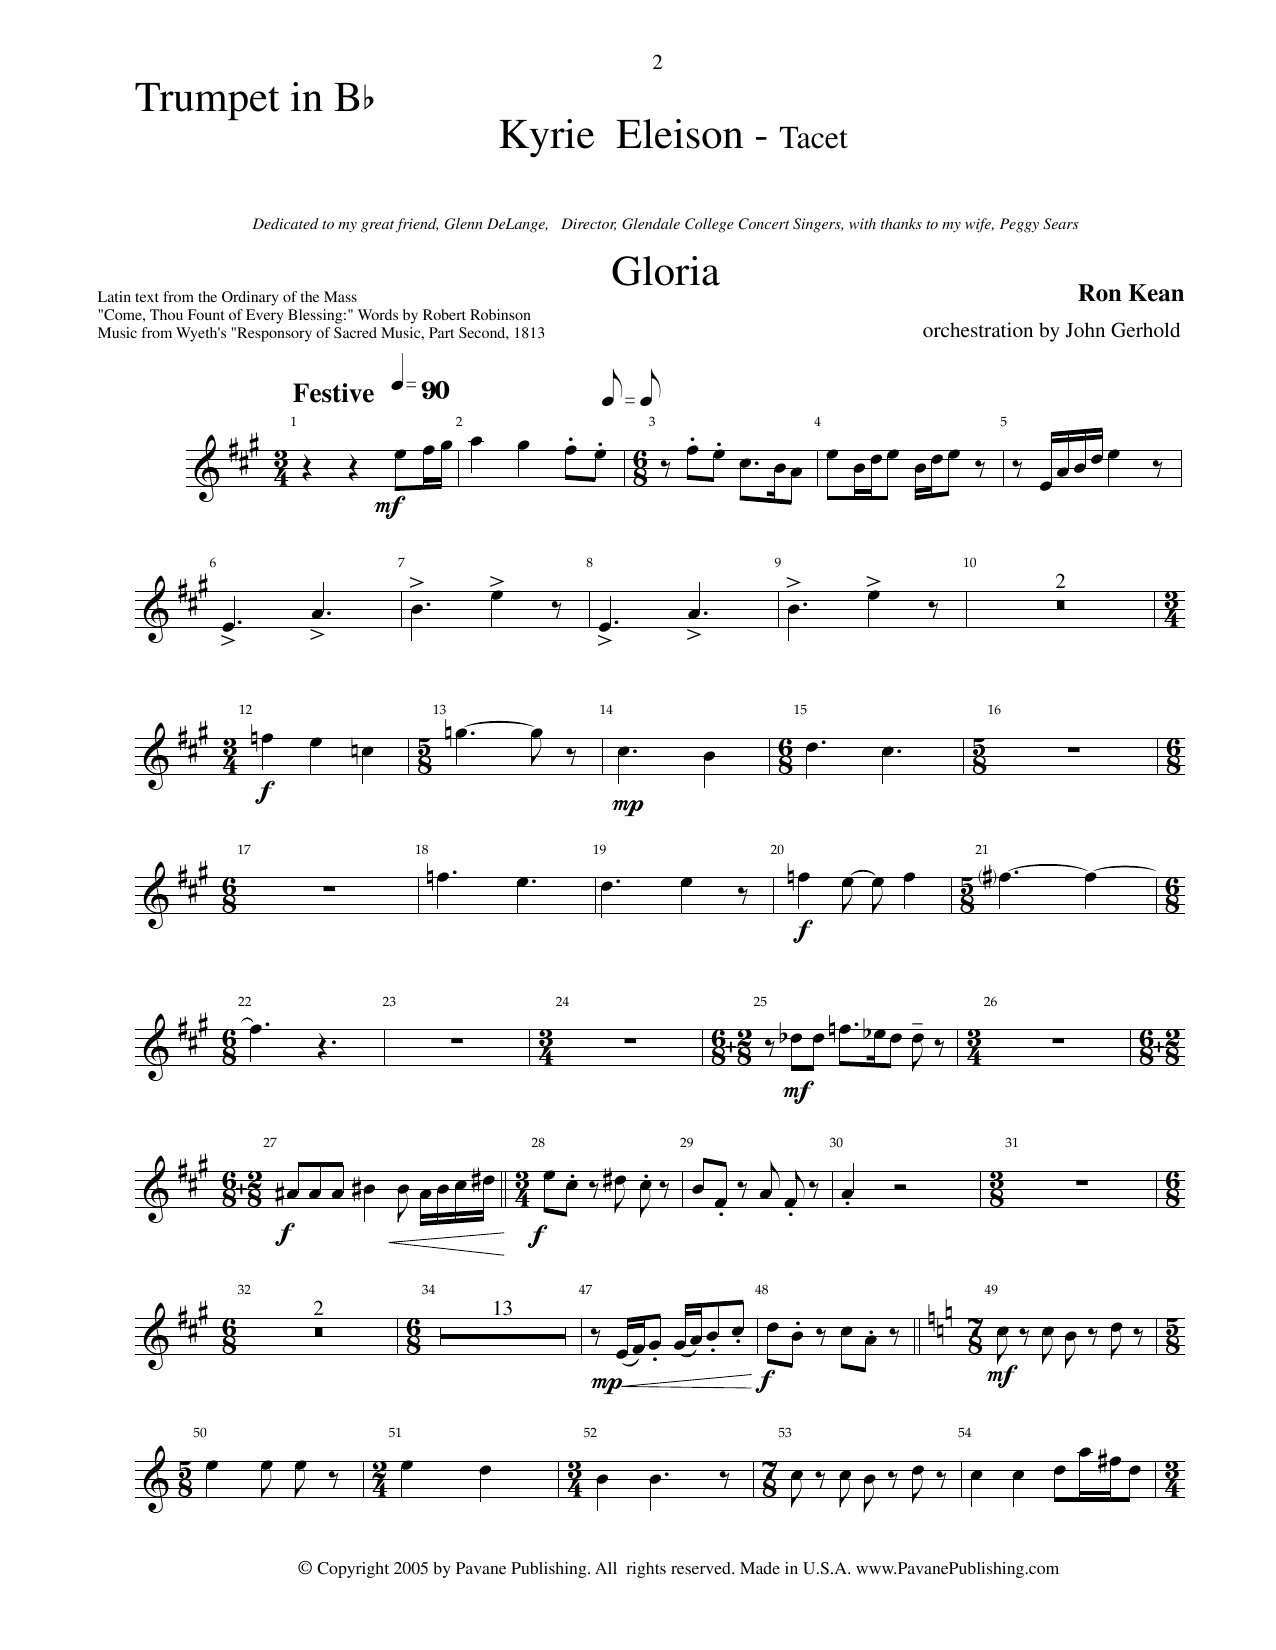 Download Ron Kean American Mass (Chamber Orchestra) (arr. Sheet Music